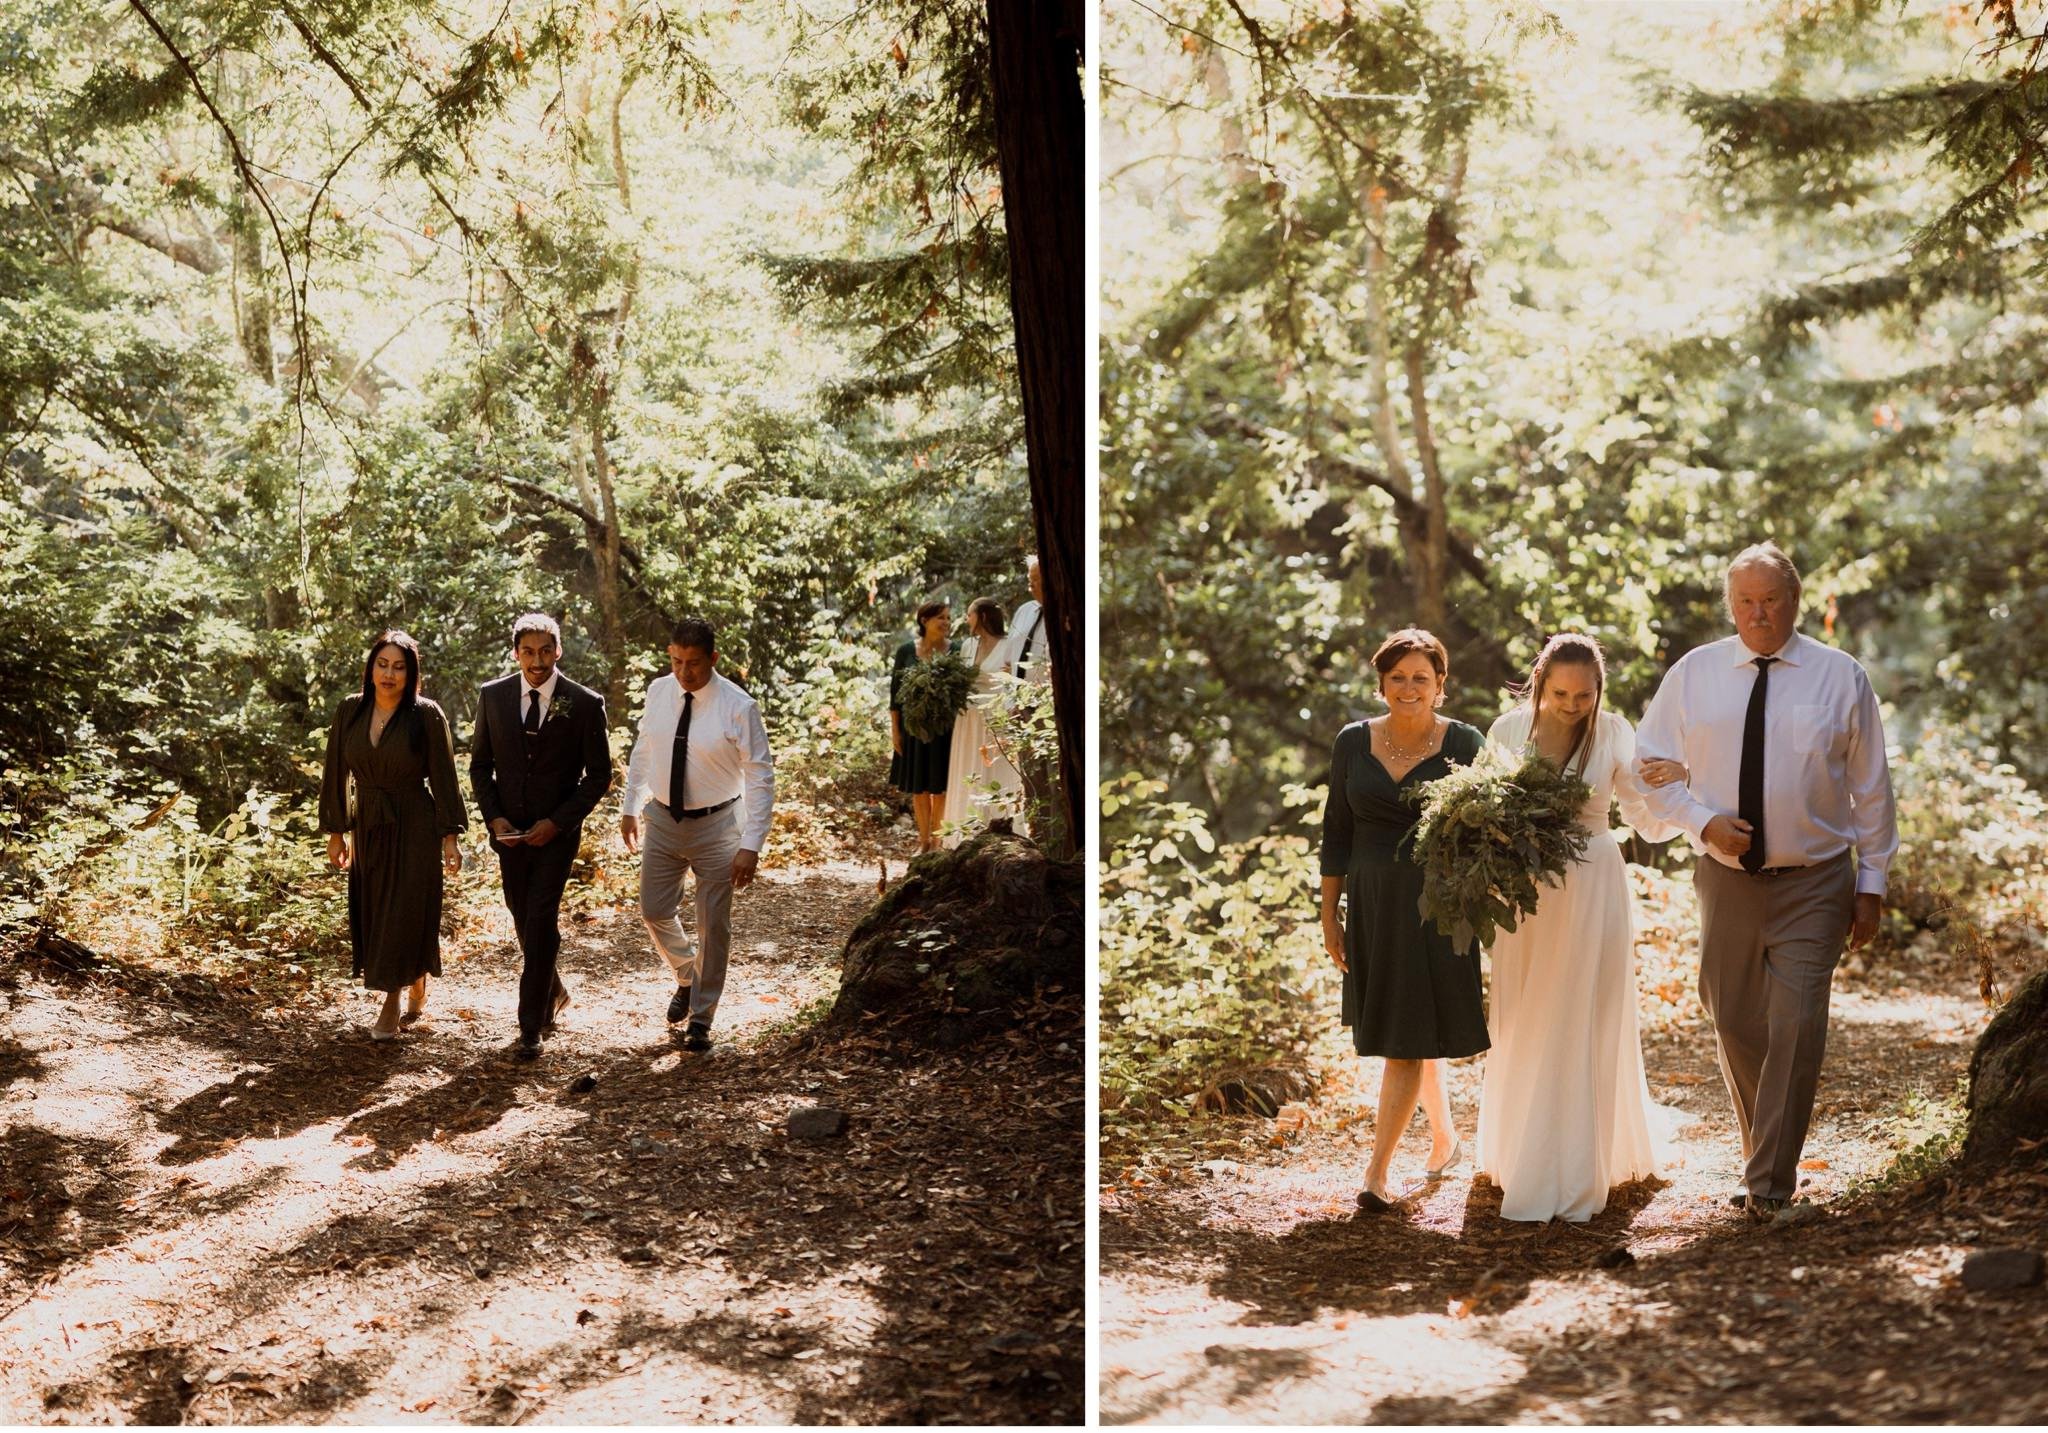 038_Two-Day Big Sur Redwoods Elopement with Family_Will Khoury Elopement Photographer.jpg